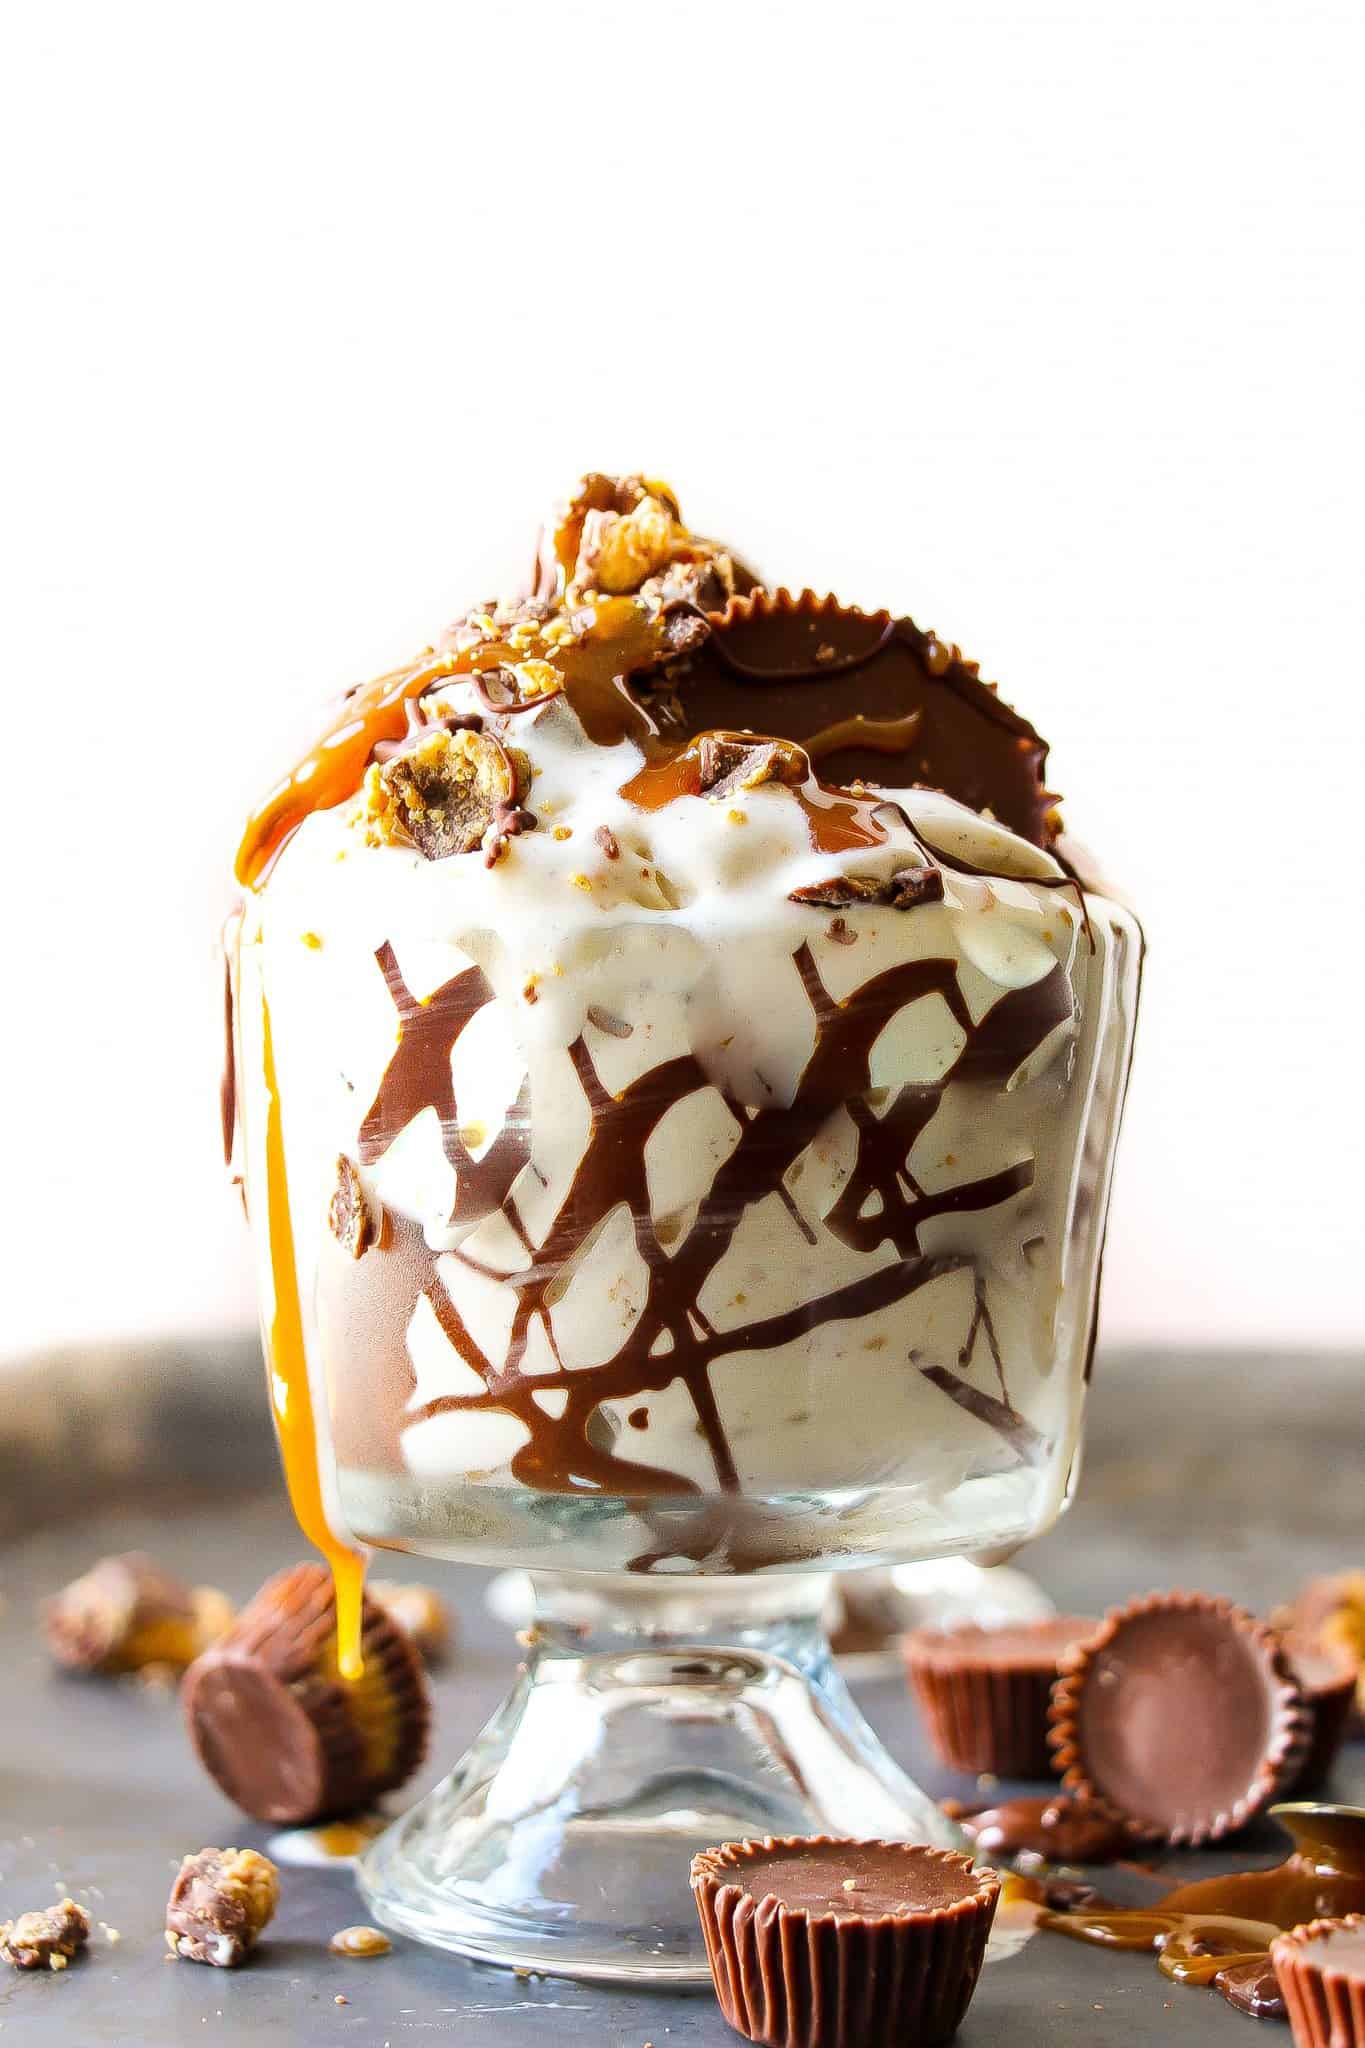 Homemade McFlurry with chocolate fudge drizzle and salted caramel